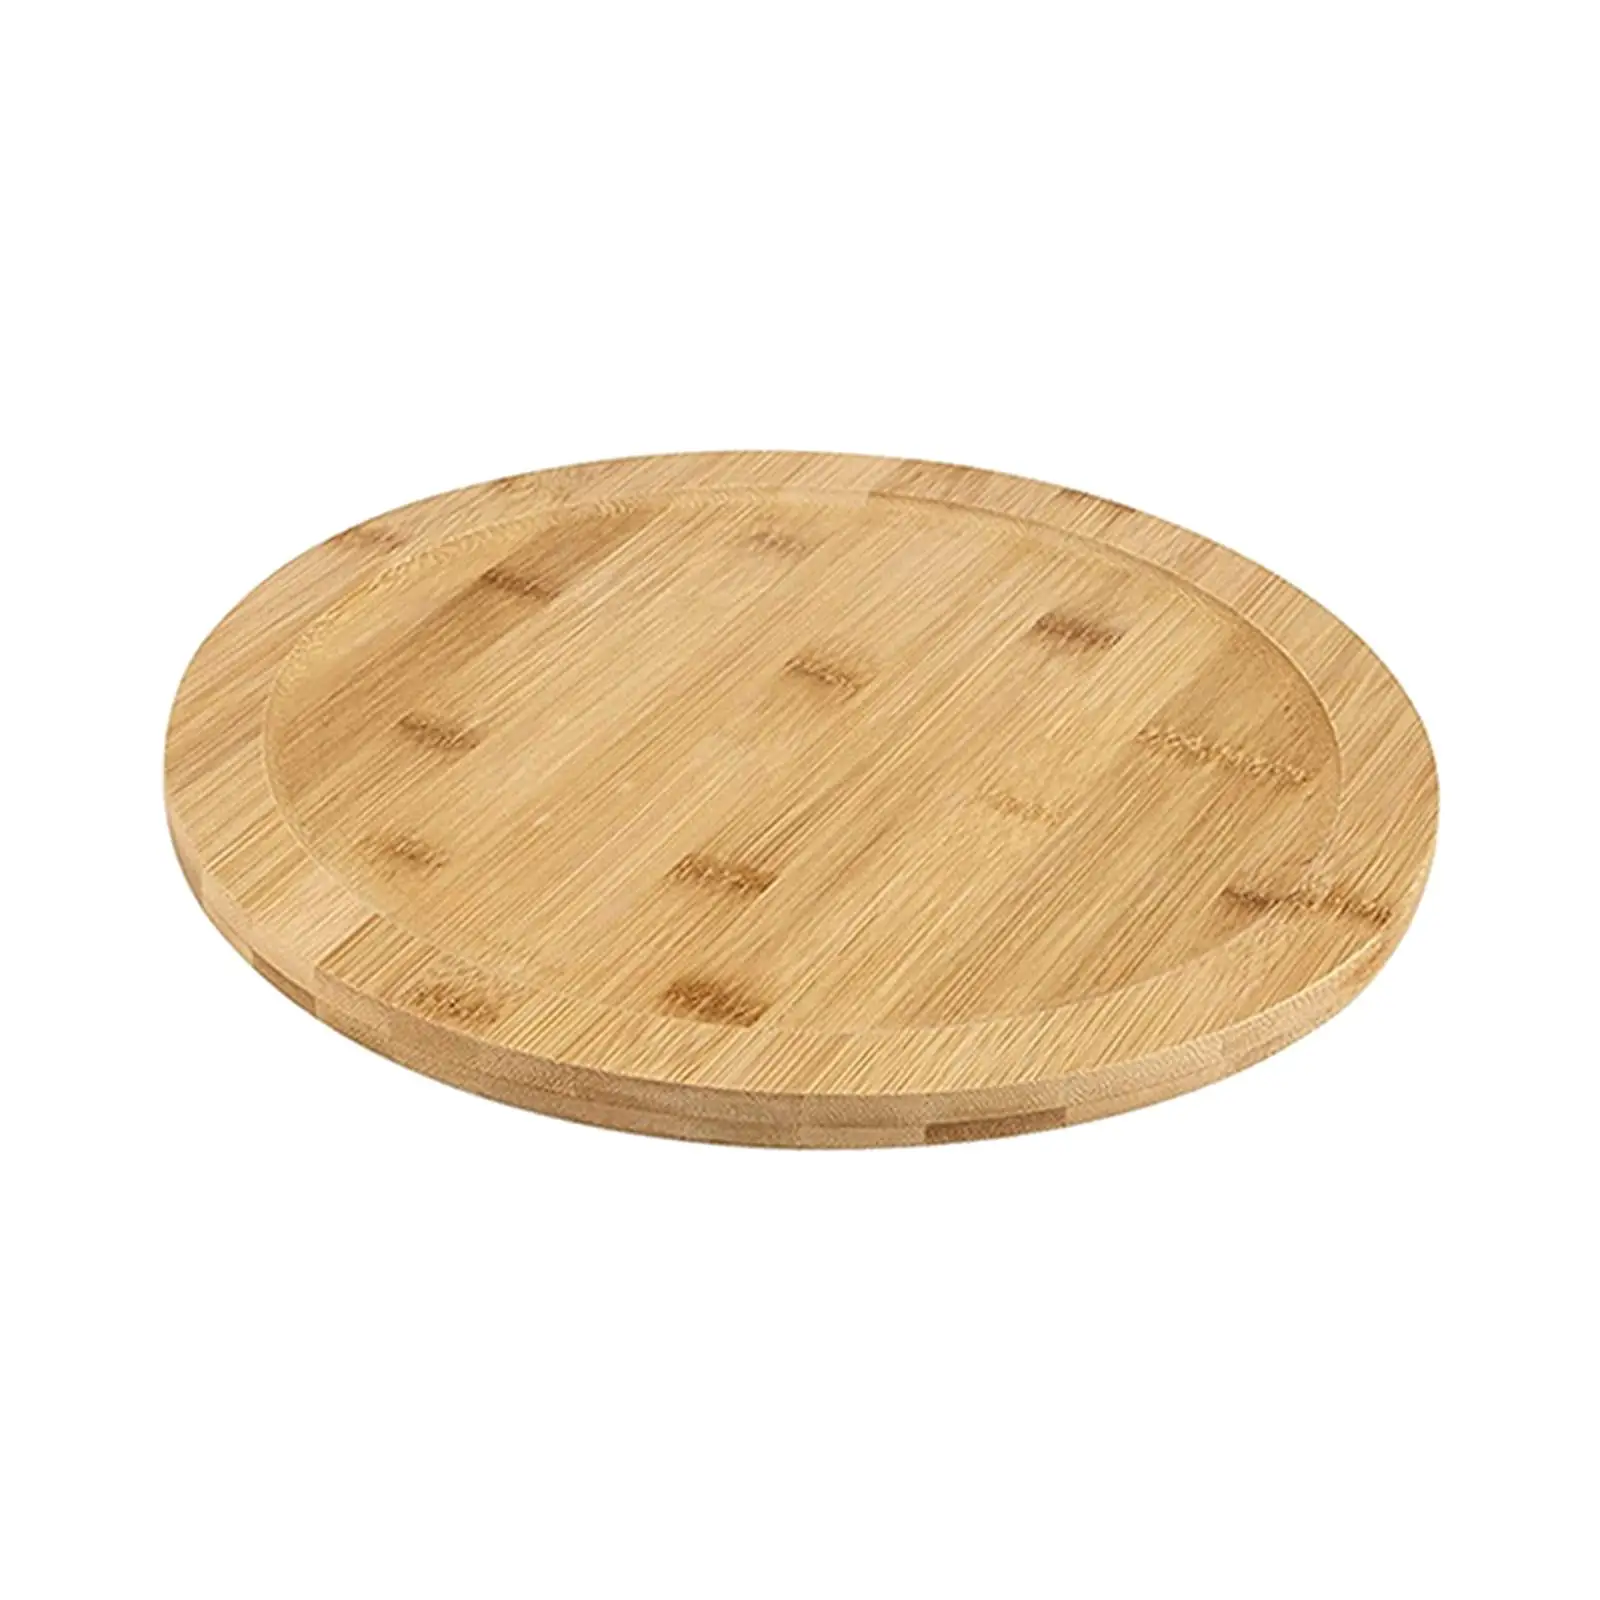 Wooden Turntable Serving Plate for Pantry Dining Table Kitchen Countertop